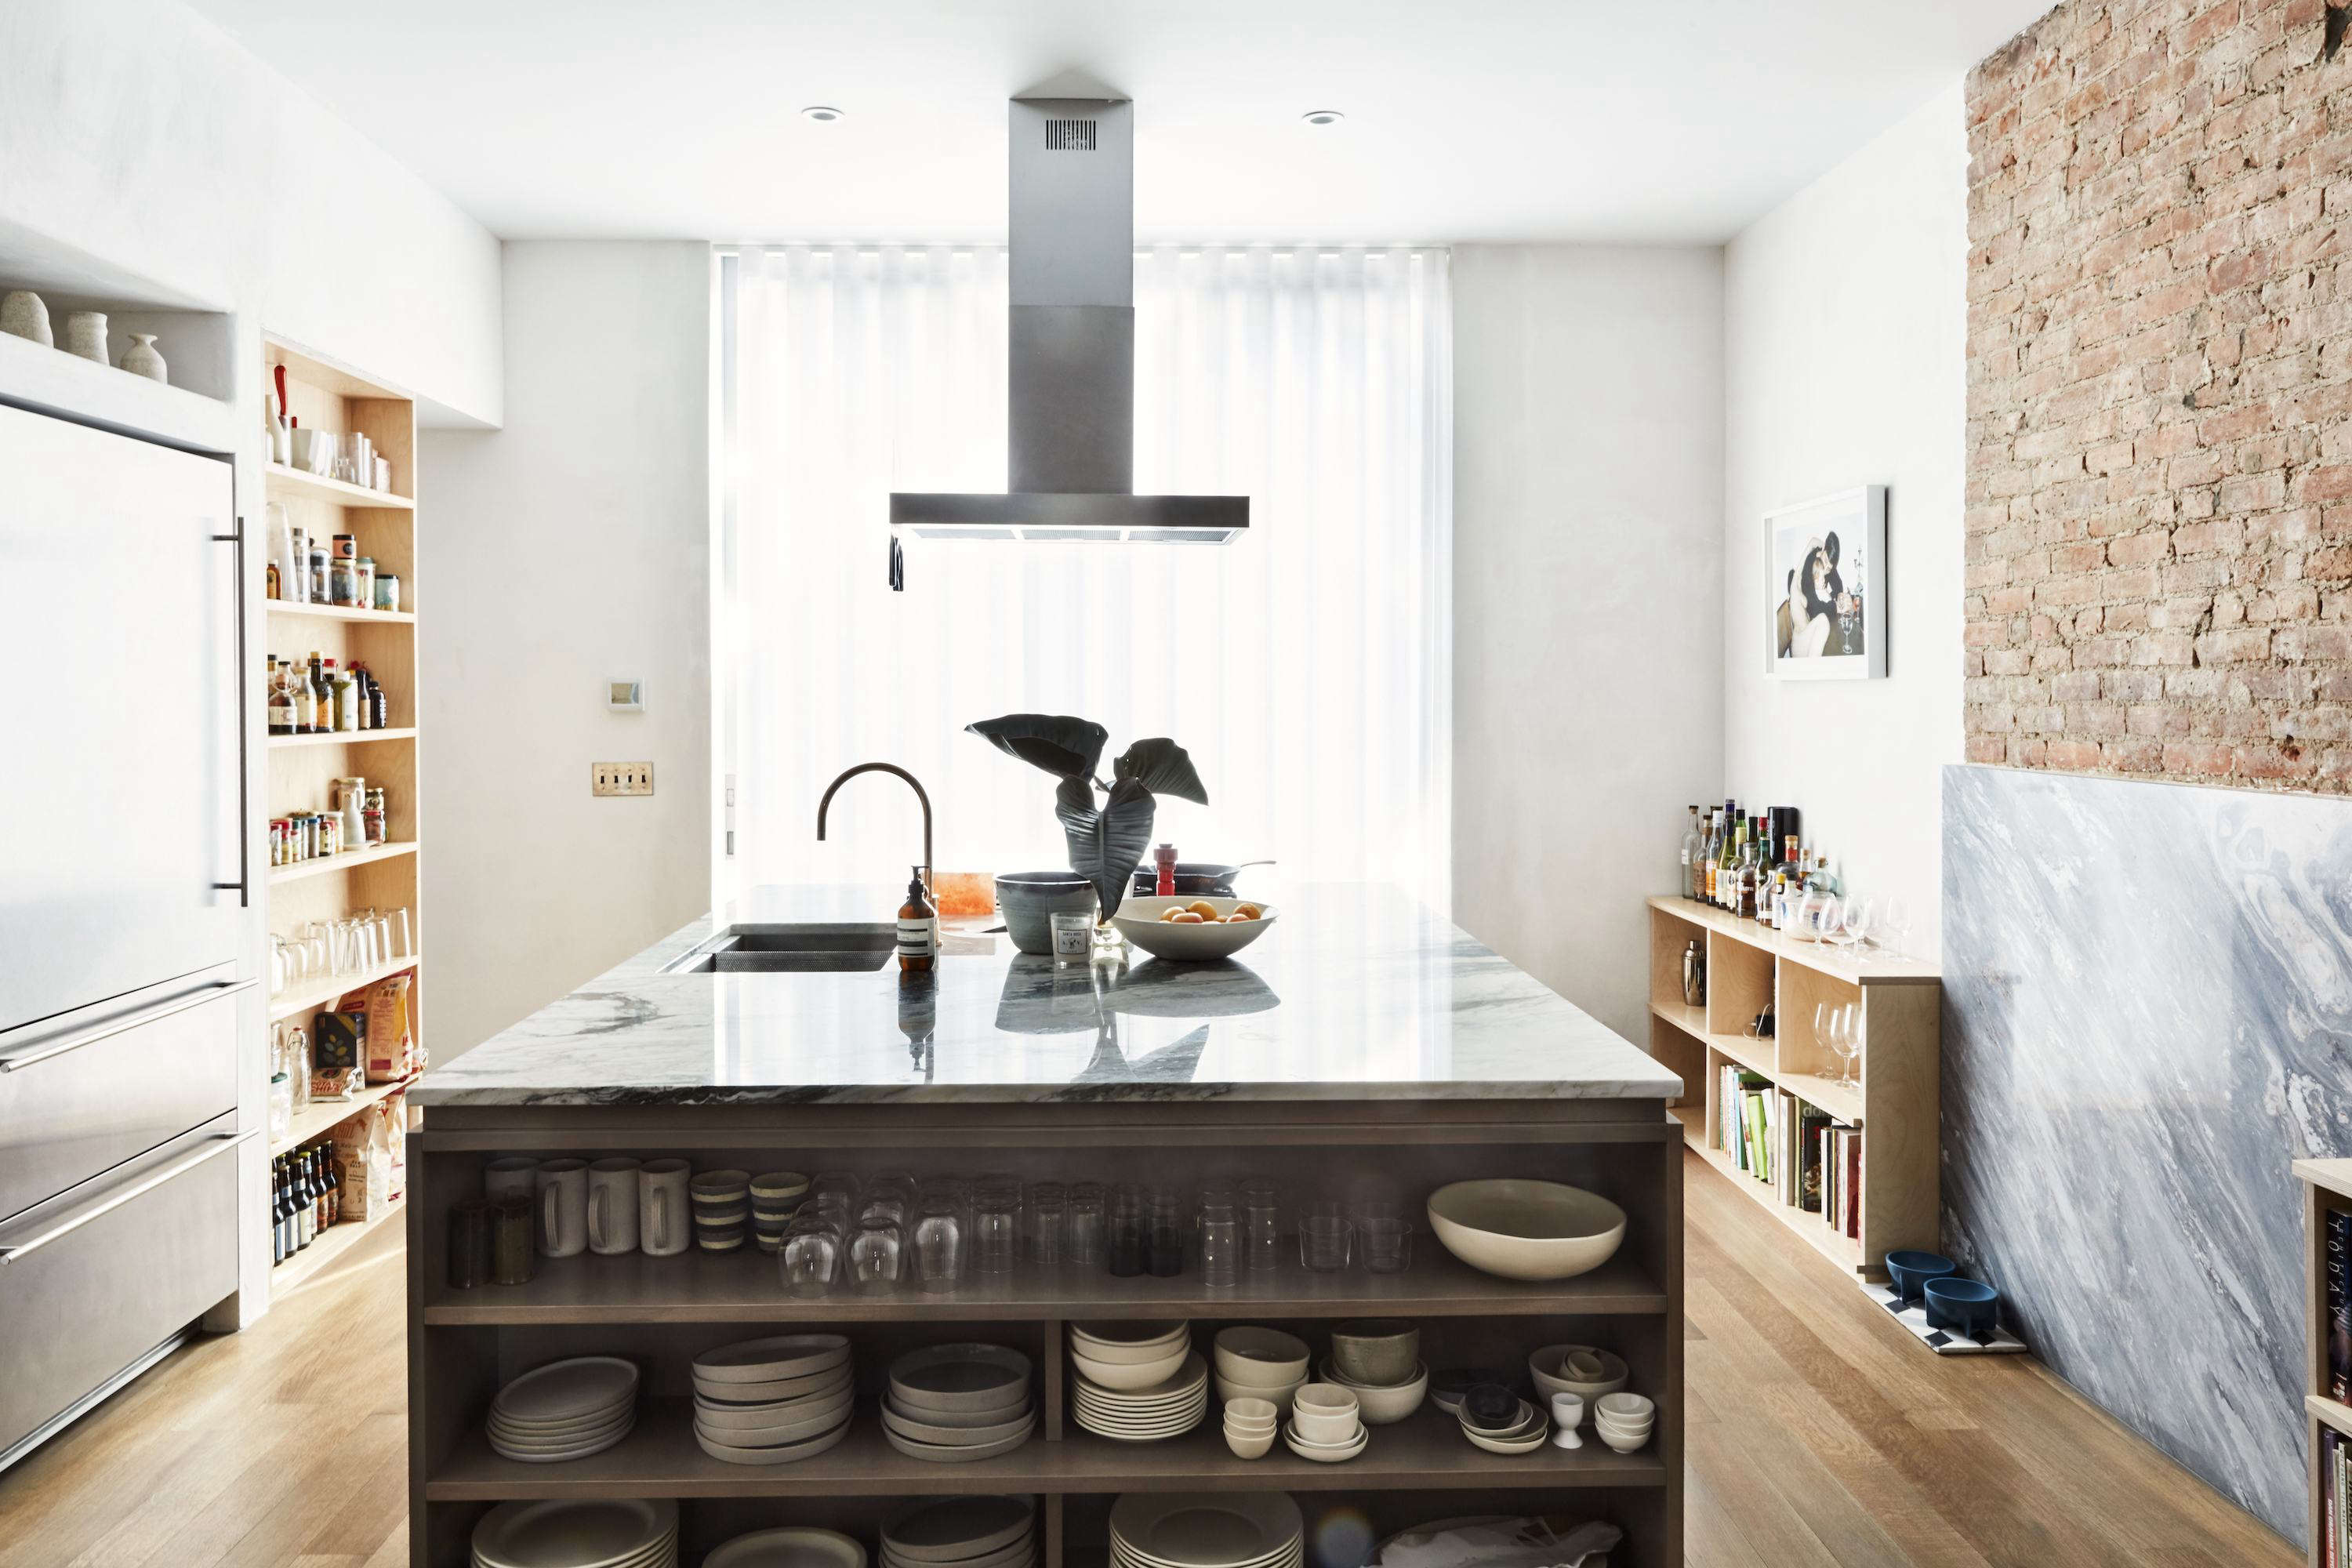 Kitchen(s) of the Week: 9 All-Time Favorites in Brooklyn - Remodelista